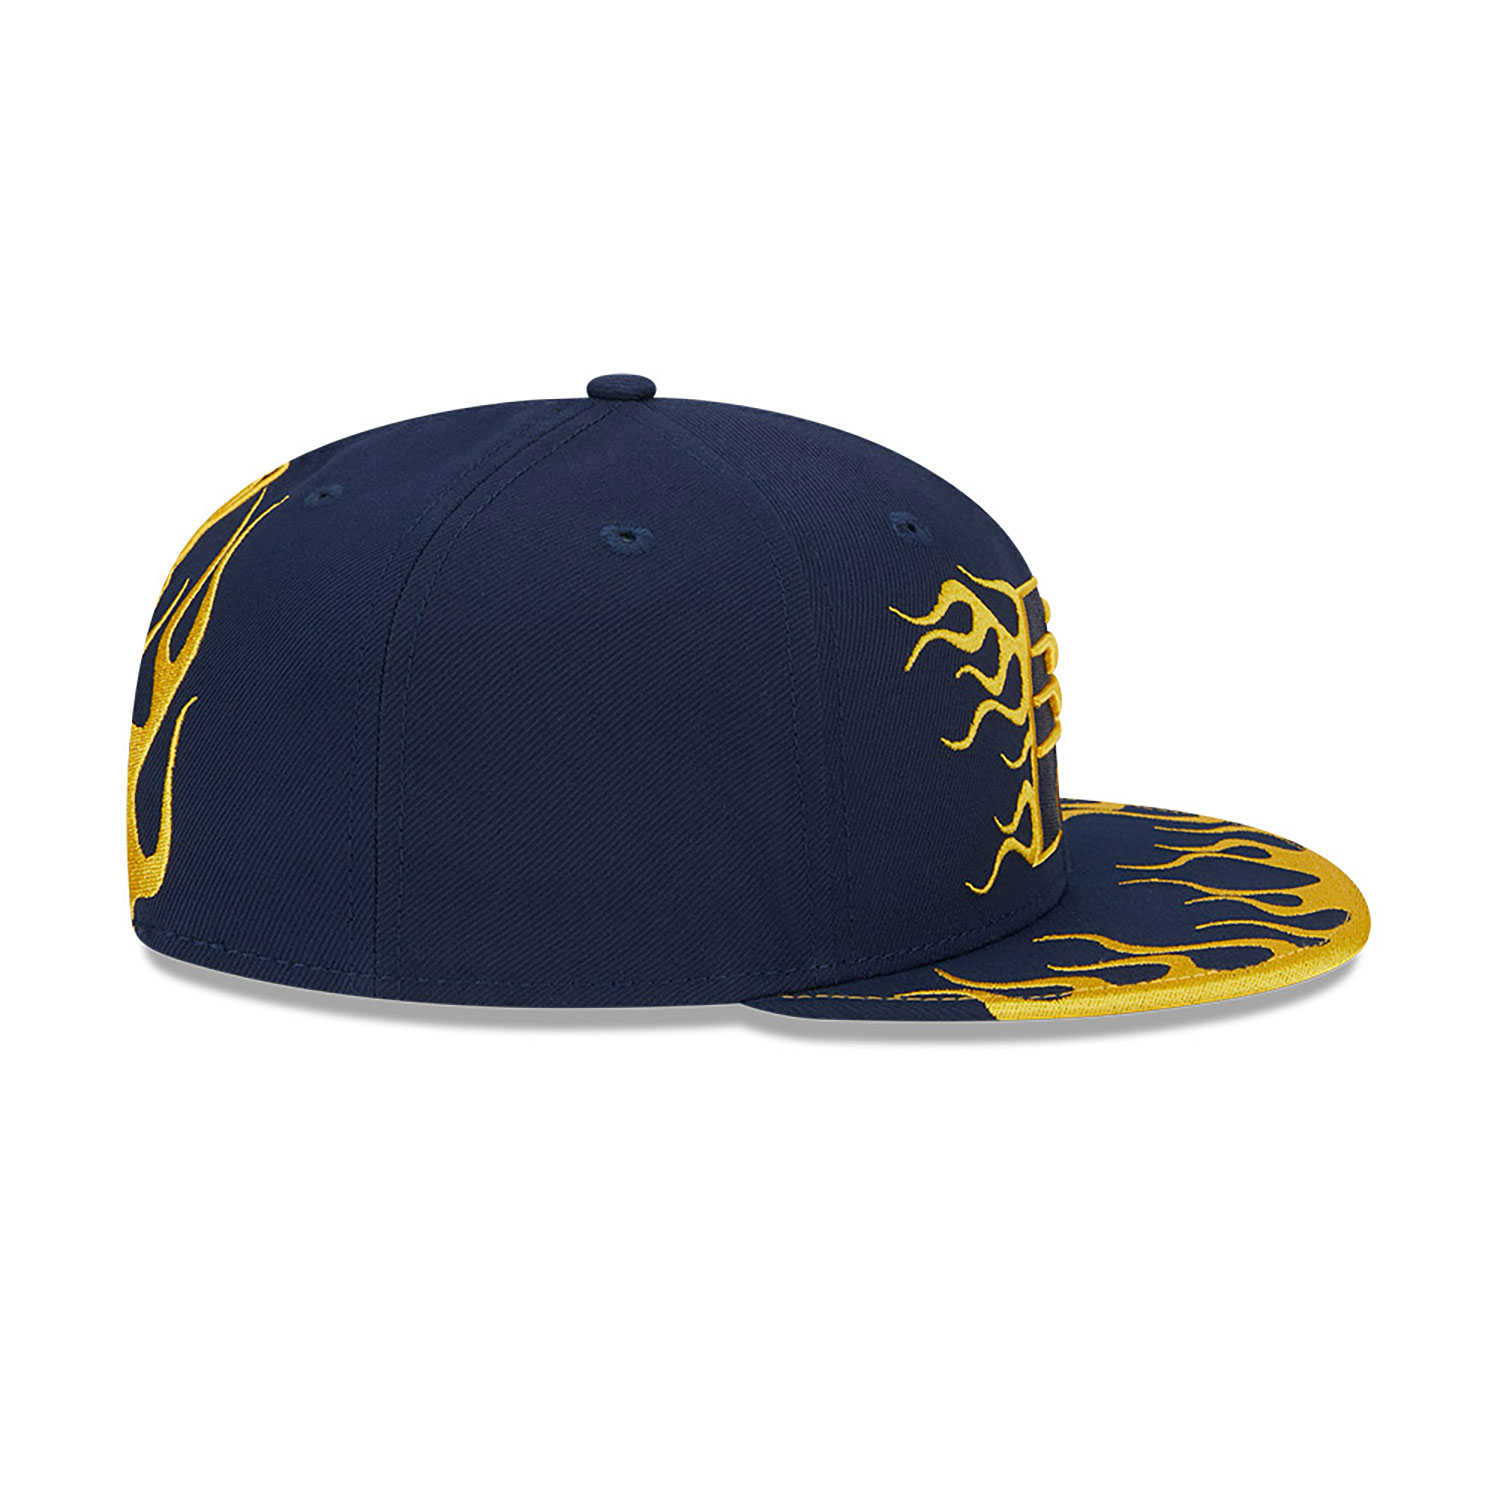 Indiana Pacers NBA Rally Drive Navy 9FIFTY Snapback Cap